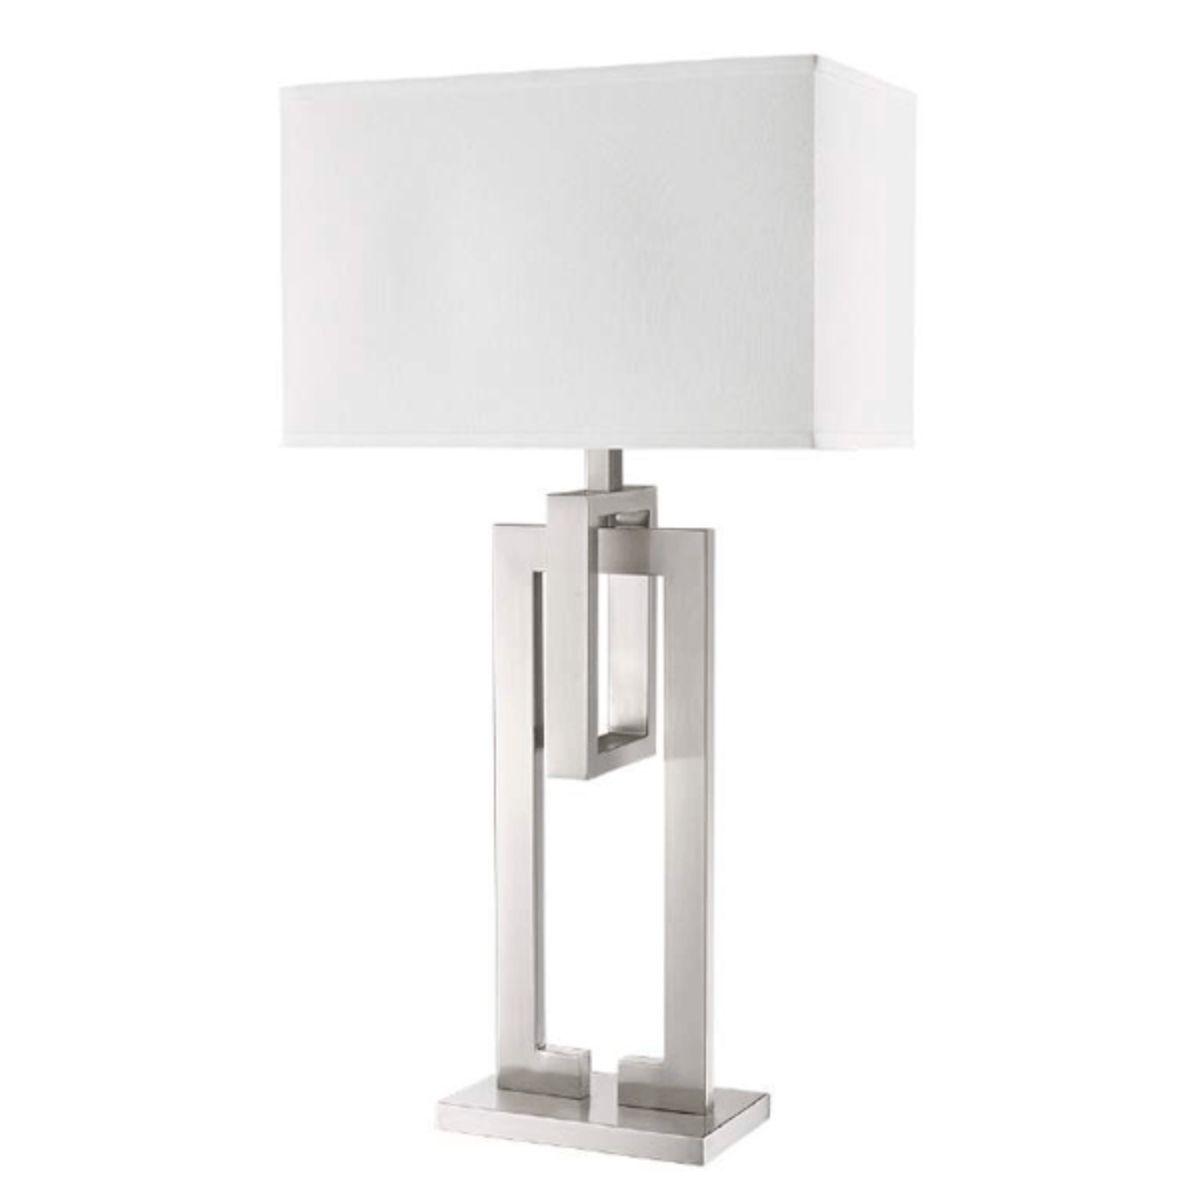 Precision 1 Light Table Lamp Brushed Nickel Finish